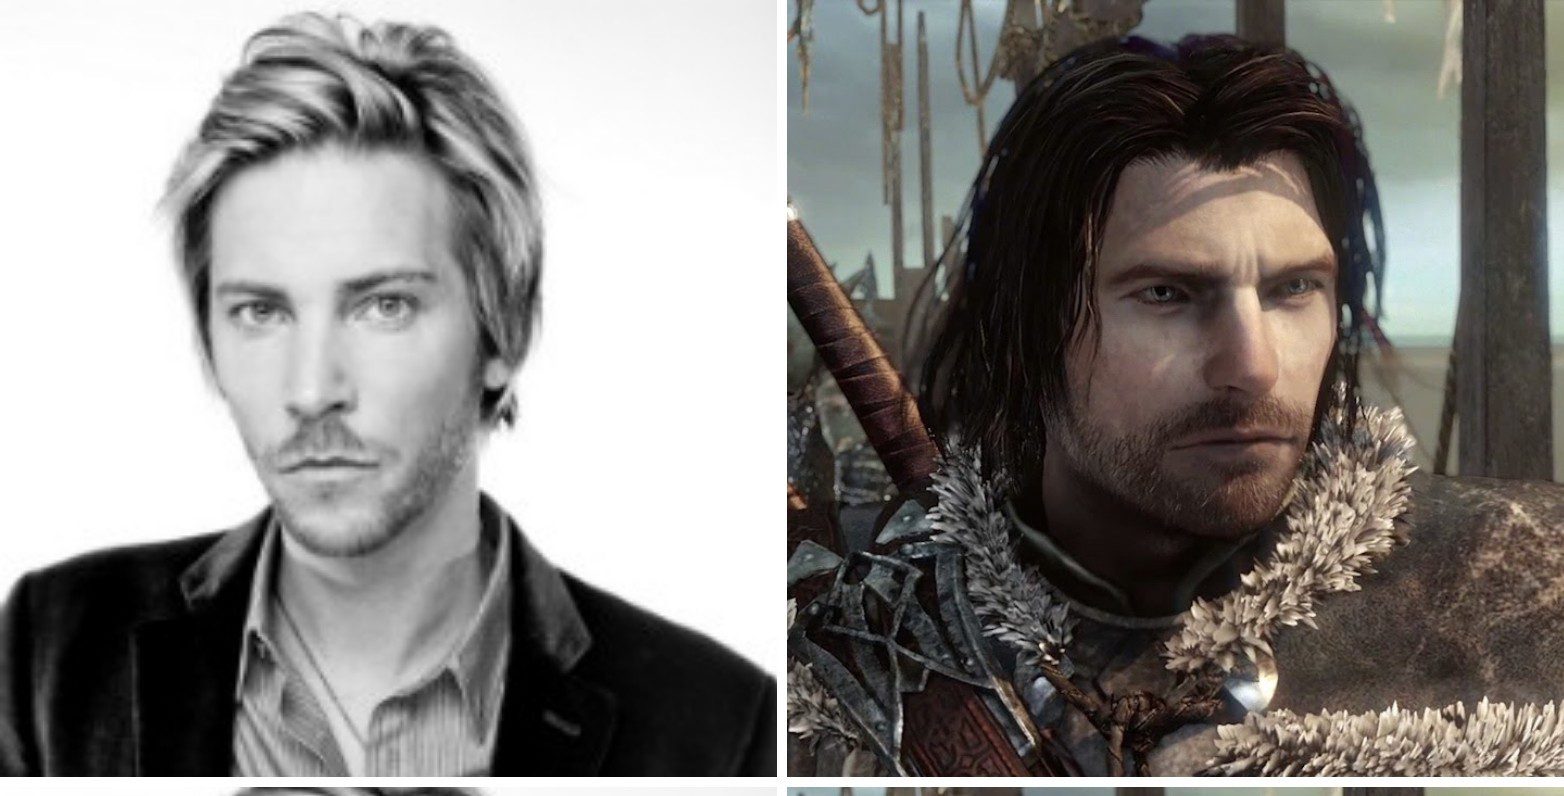 Troy Baker To Reprise Role in Middle-Earth: Shadow of War